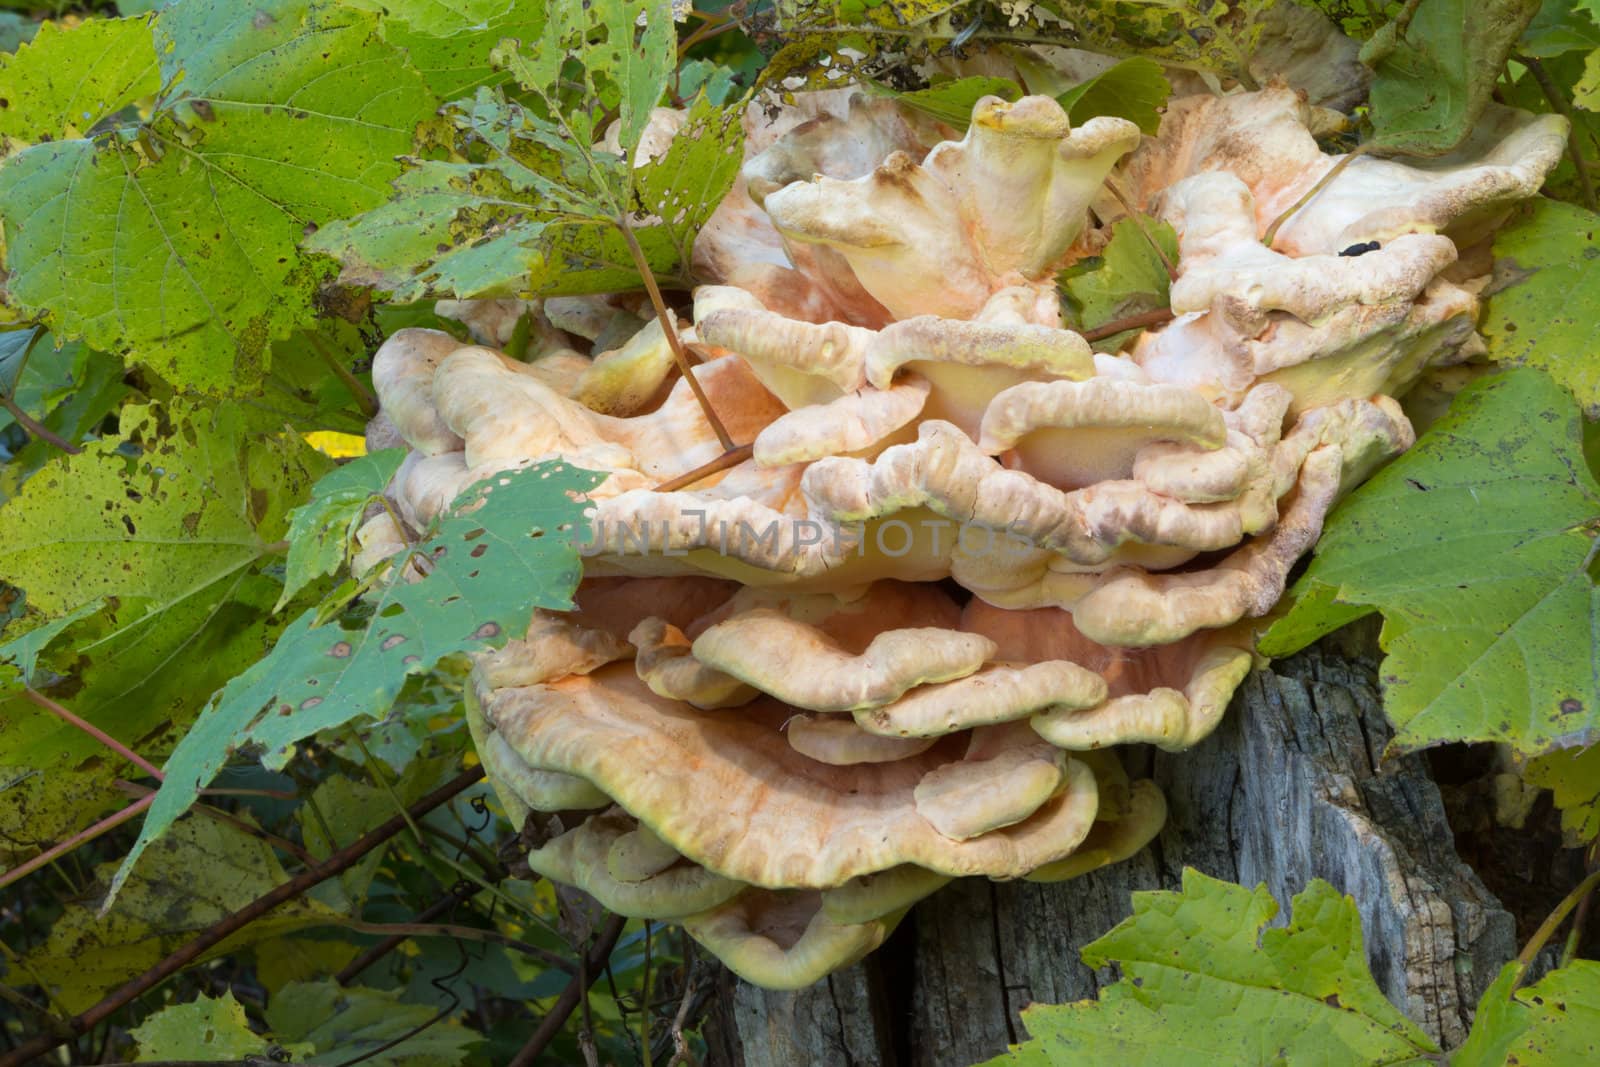 Mushroom Grows On Sides of Tree Stump by wolterk